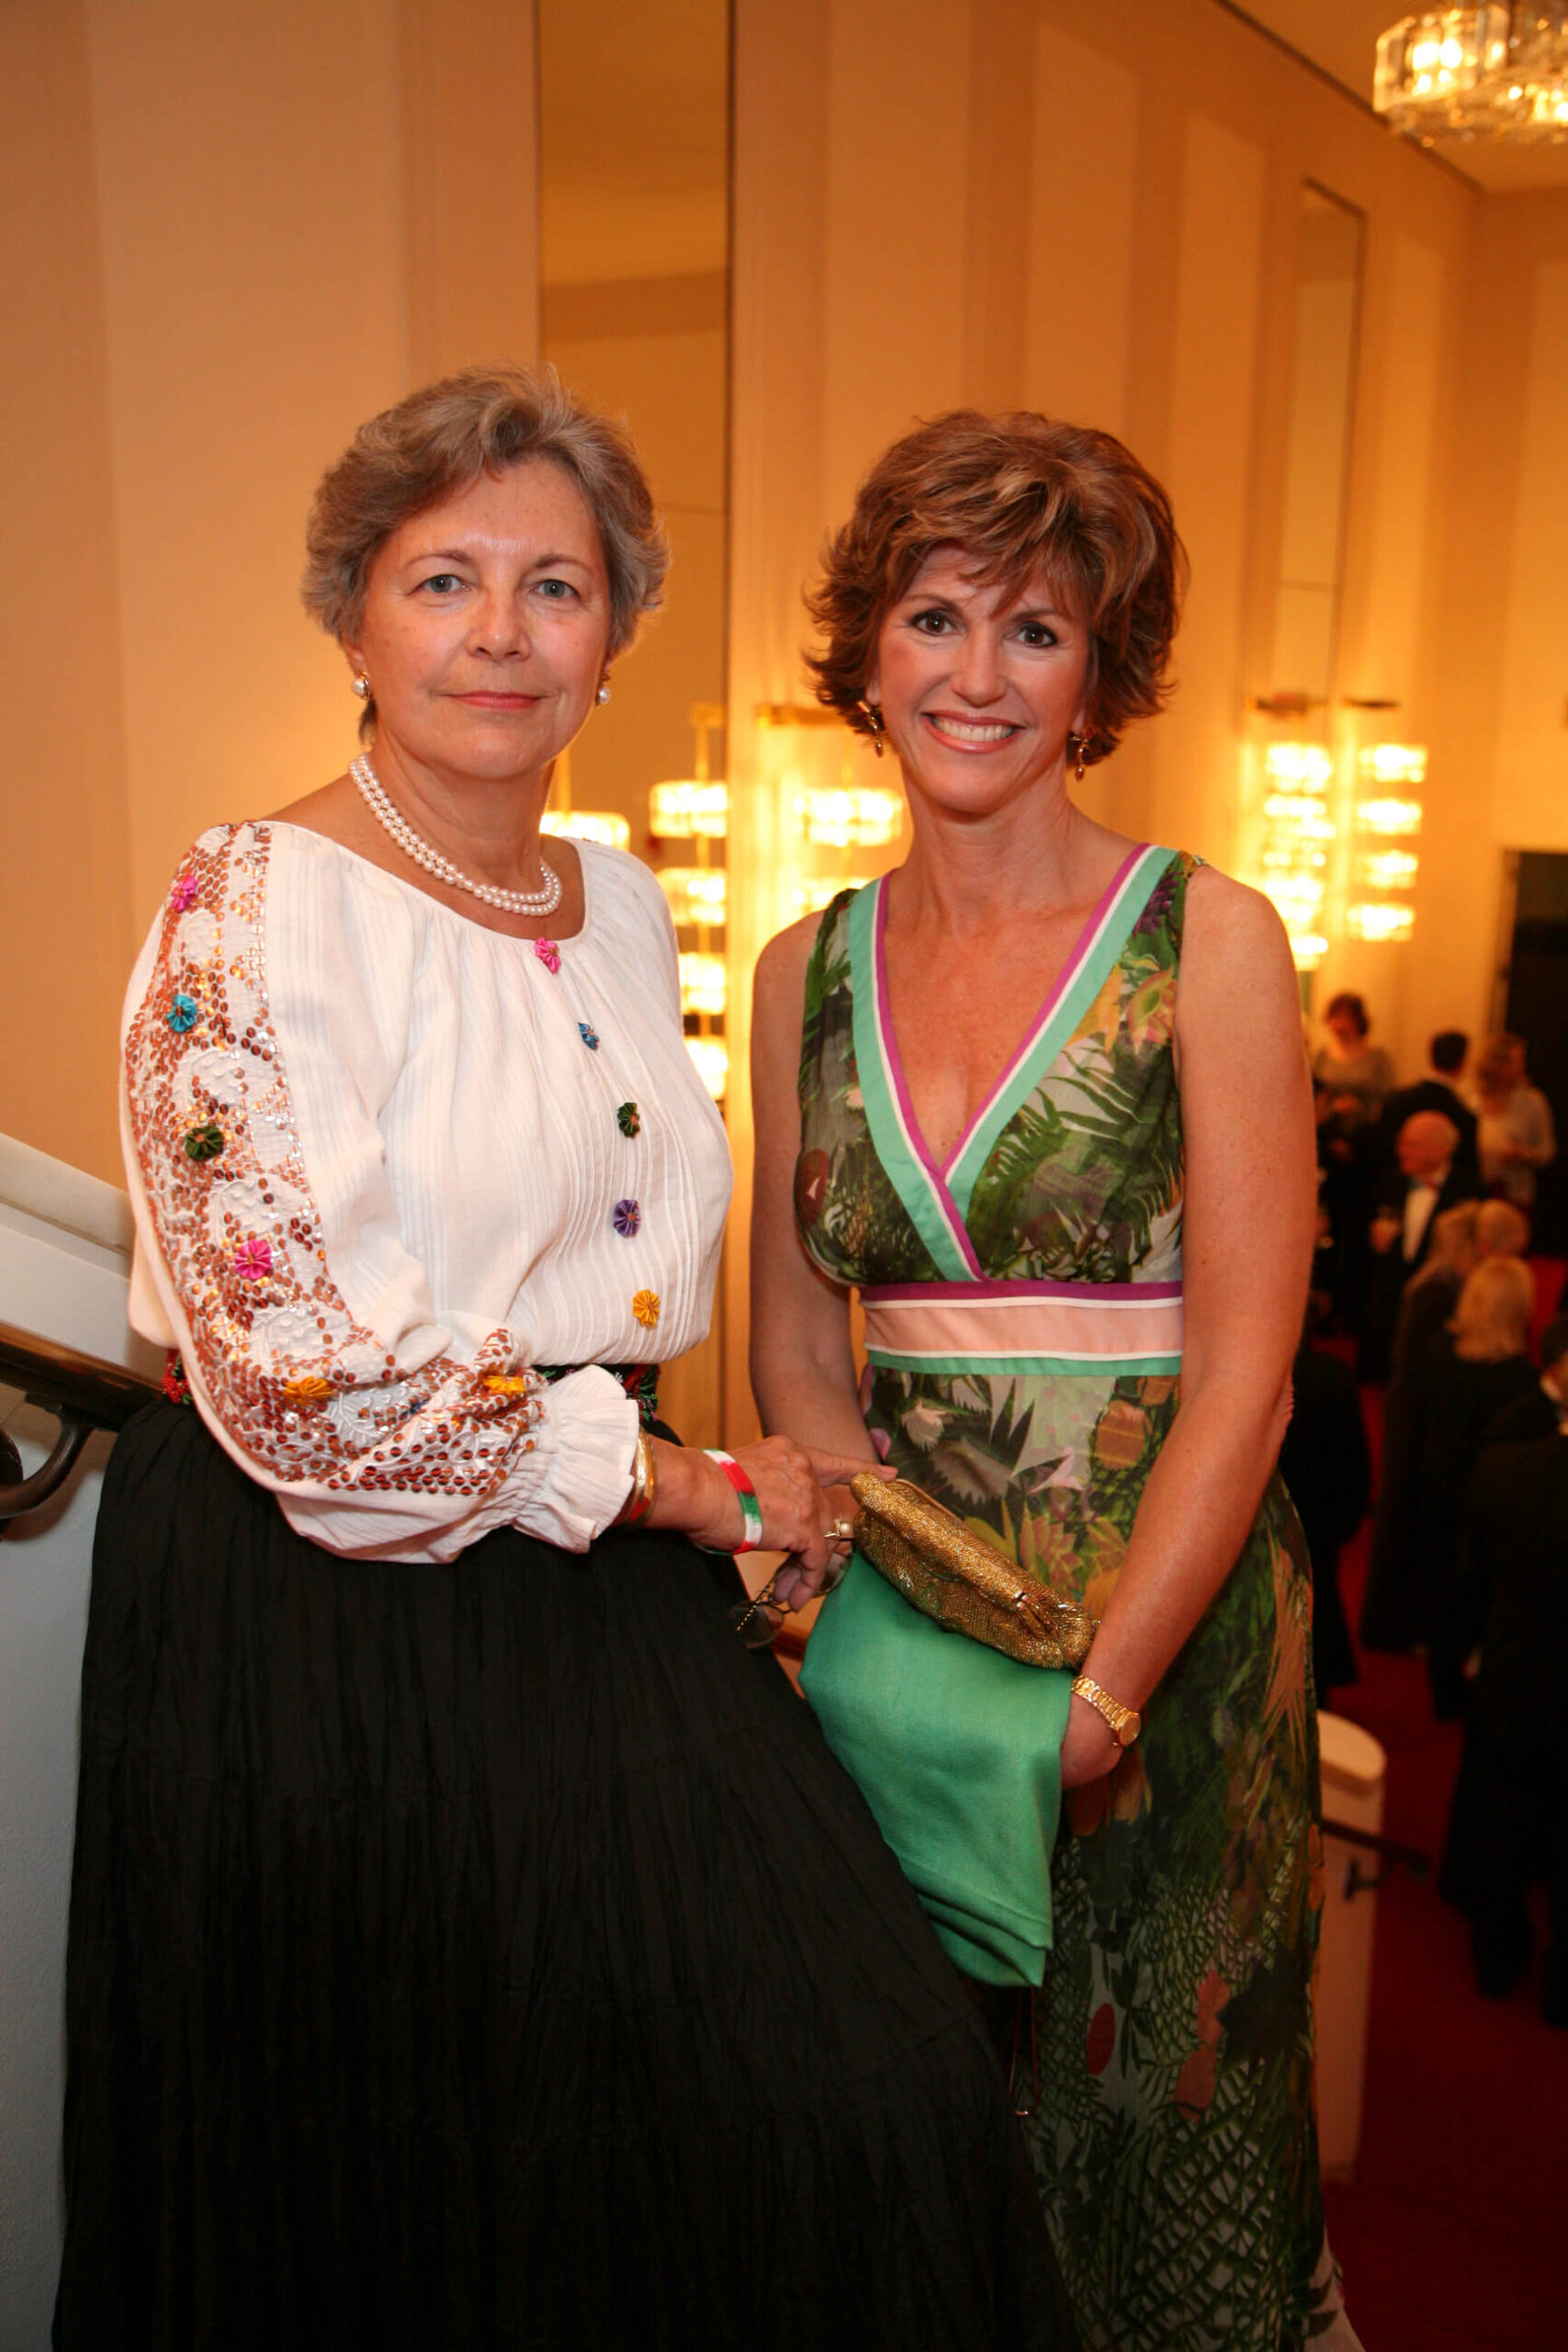 Mrs. Edith Lauer, and Ms. Susan Hutchison